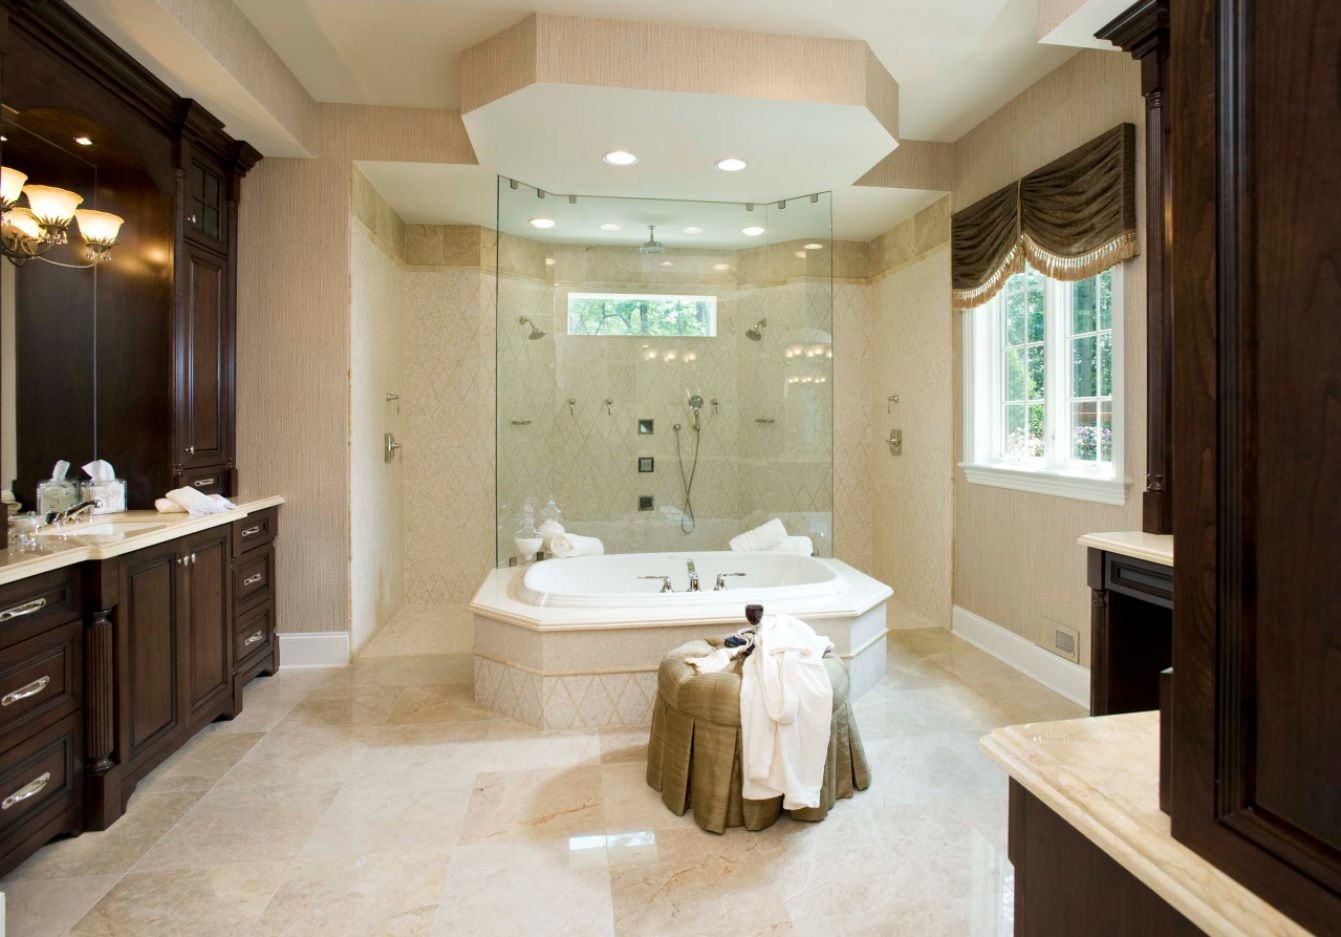 Stone trimmed monolith bathroom with shower zone behind glass separated bathtub